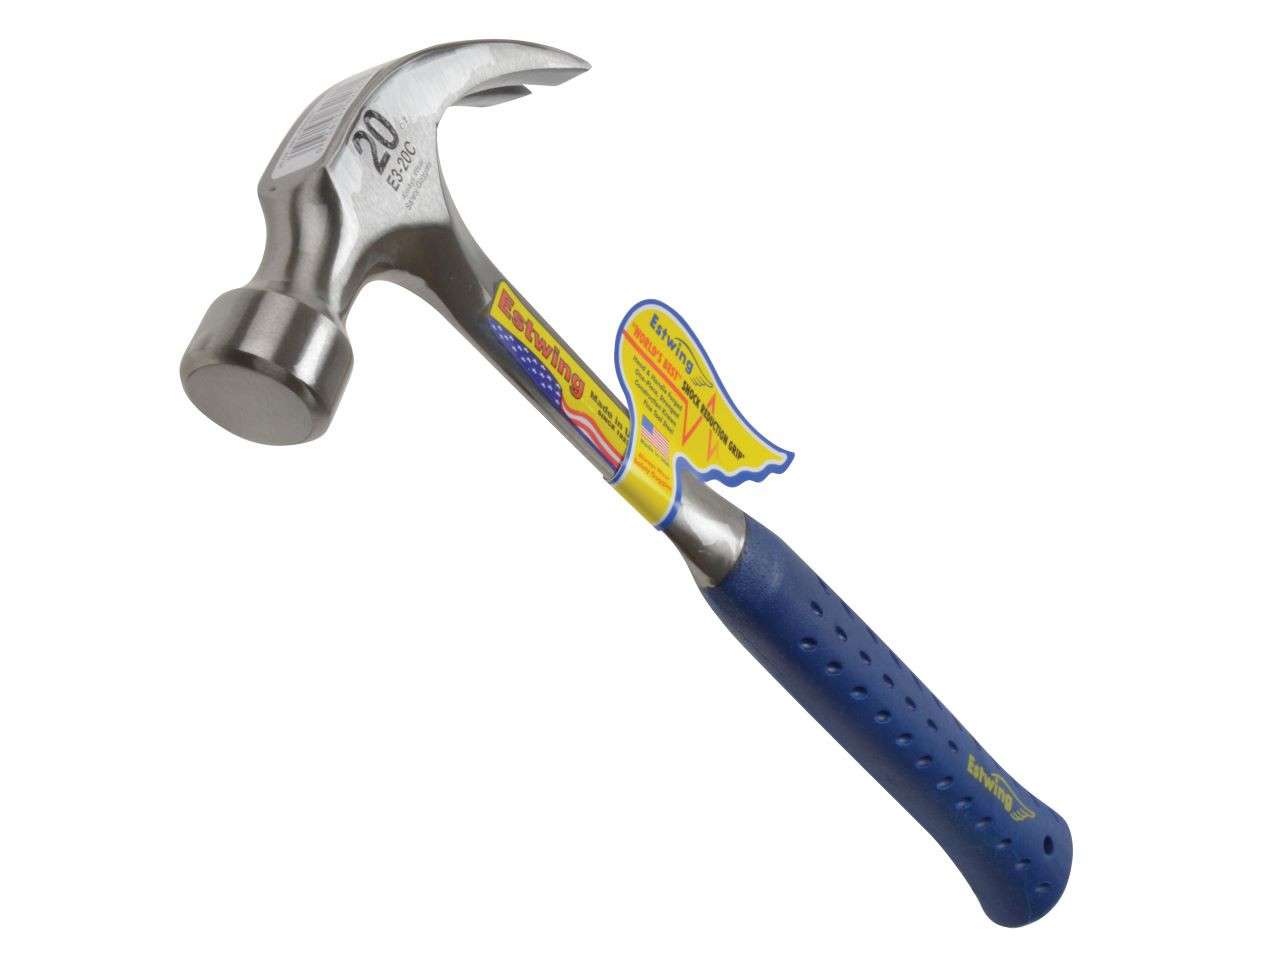 Photograph of Estwing E3/20C Curved Claw Hammer - Vinyl Grip 560g (20oz)